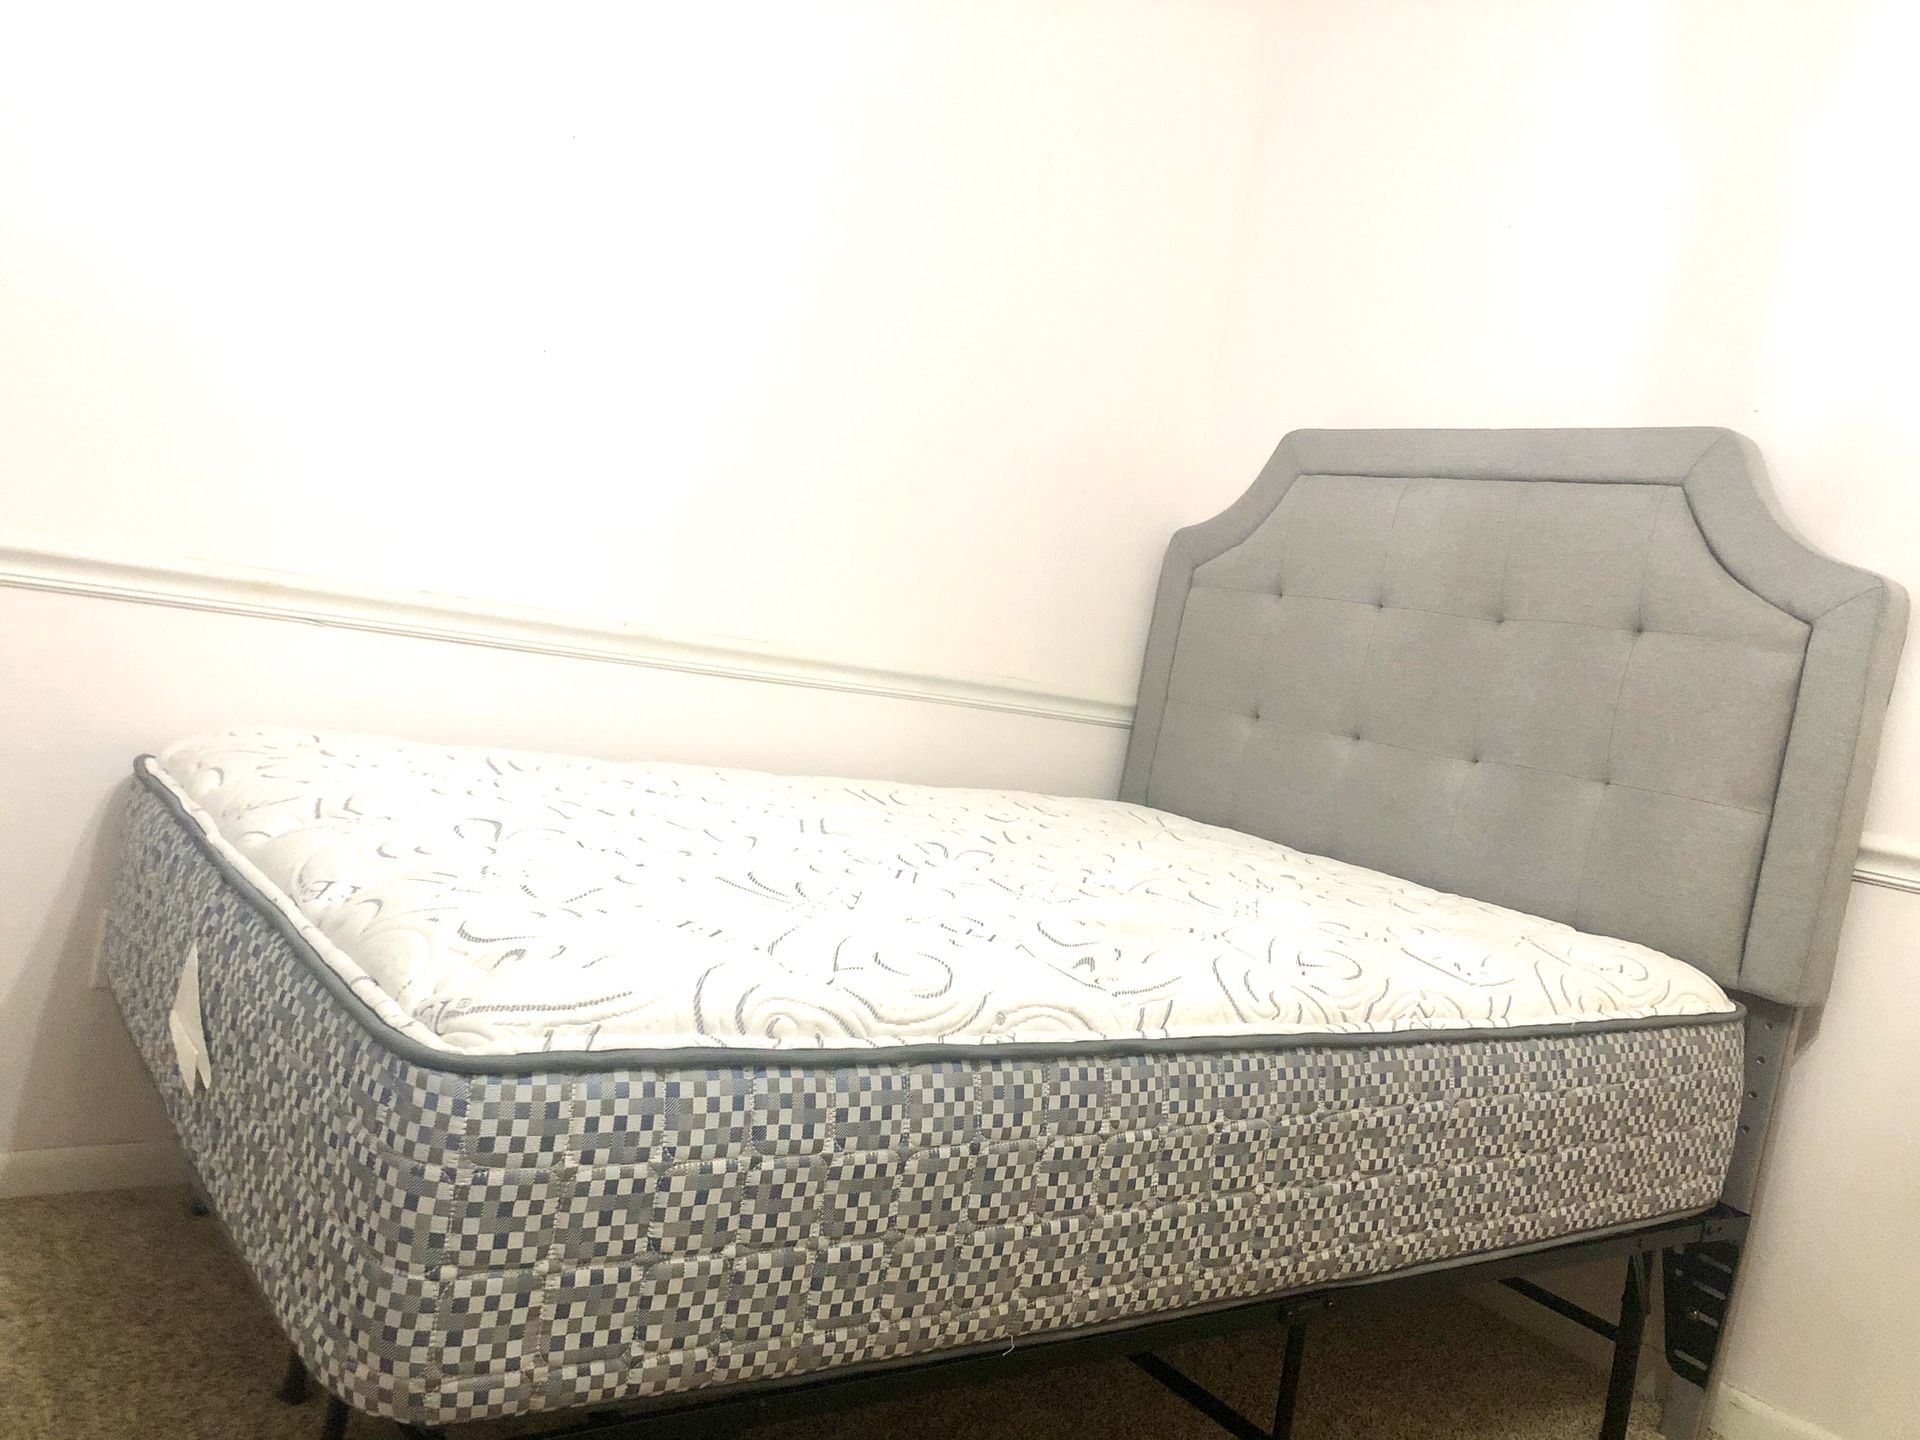 Take home on Payments - any brand new mattress set - only $40 today